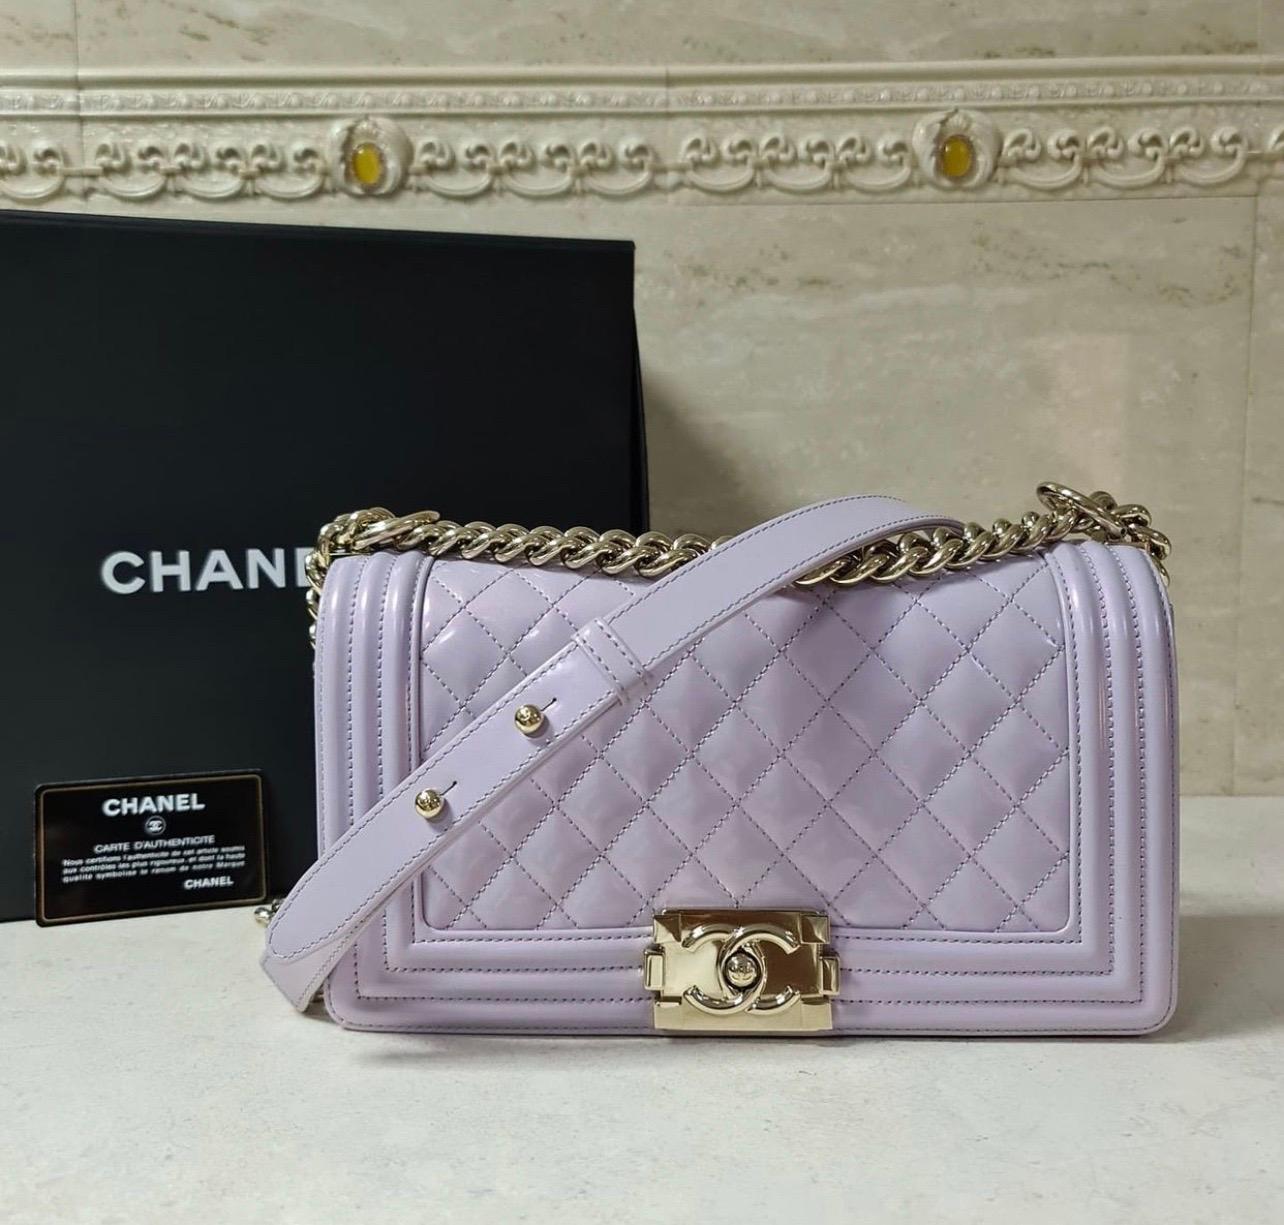 Chanel’s latest Boy Bags for Spring/Summer 2016 
Collection are made available in Iridescent Calfskin. These Boy Bags features a shiny and pearly effect, almost similar to patent leather.
 It comes in gold hardware which matches perfectly to the